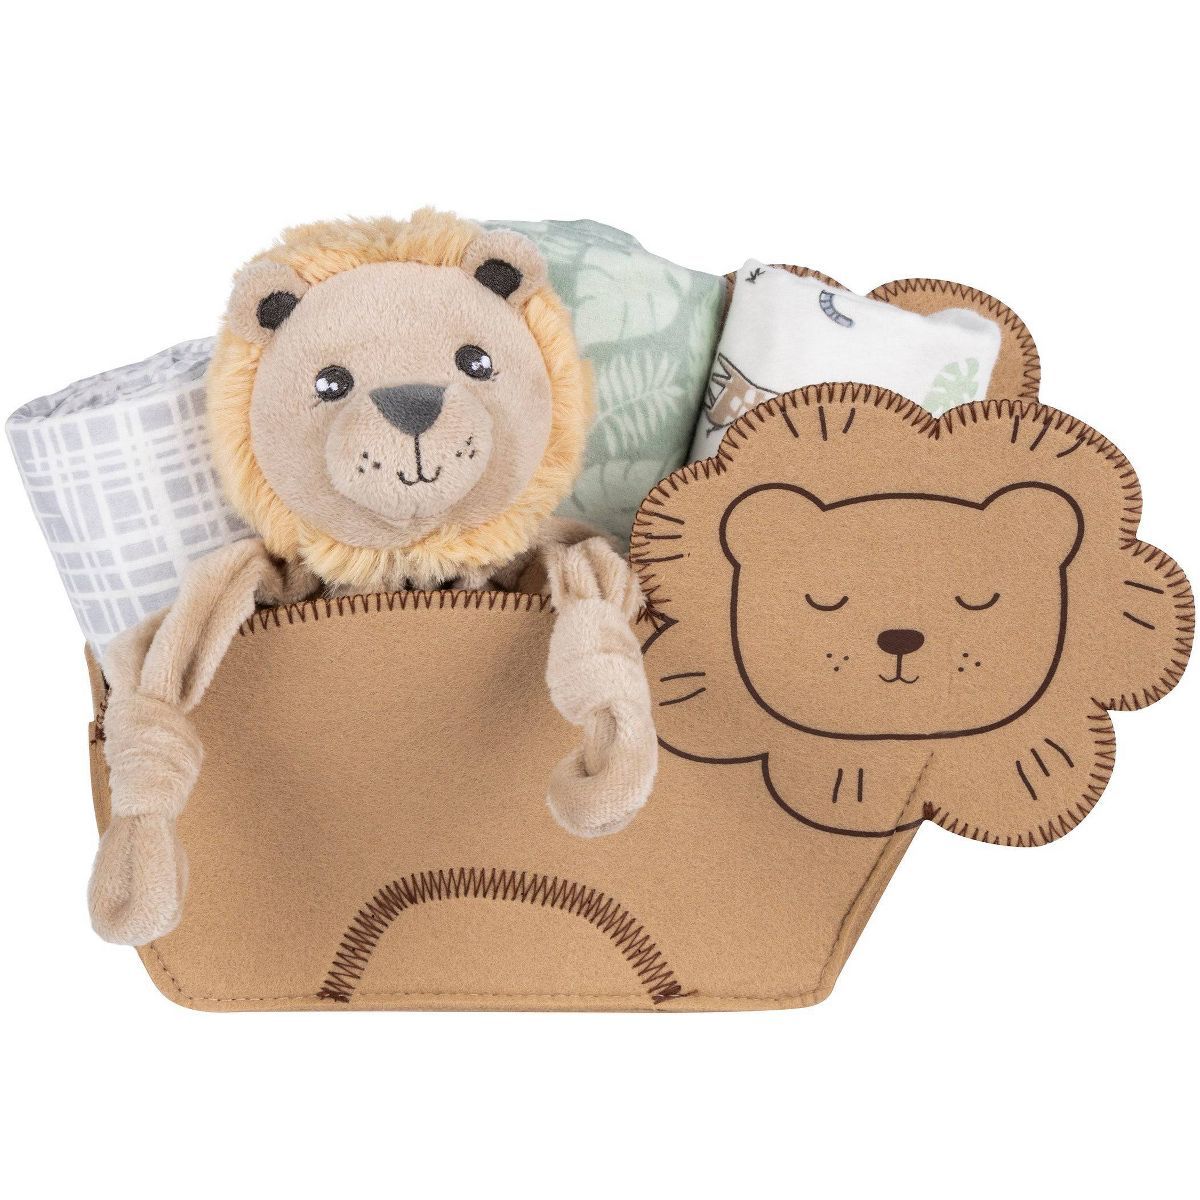 My Tiny Moments Welcome Baby Swaddle Blanket - Lion Shaped - 5pc | Target